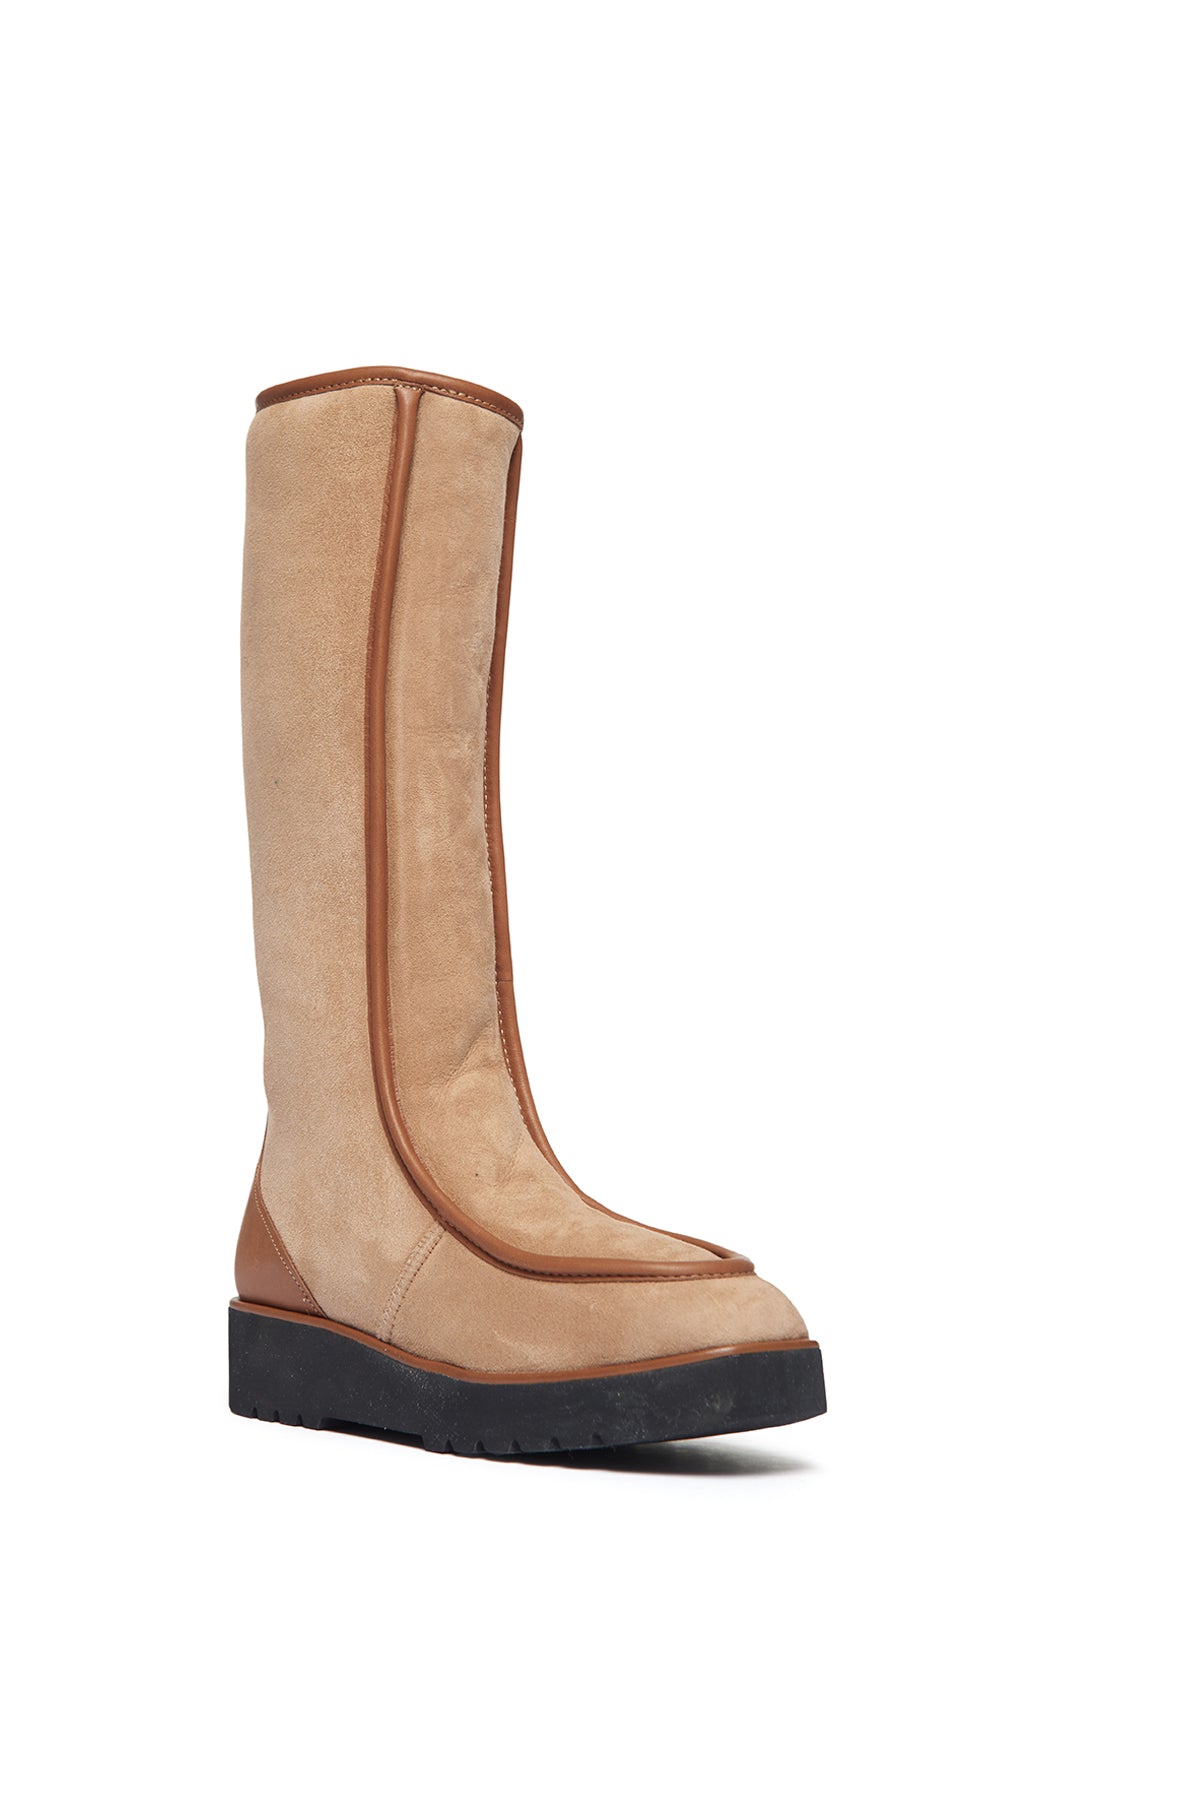 Tayna Flat Boot in Camel Leather